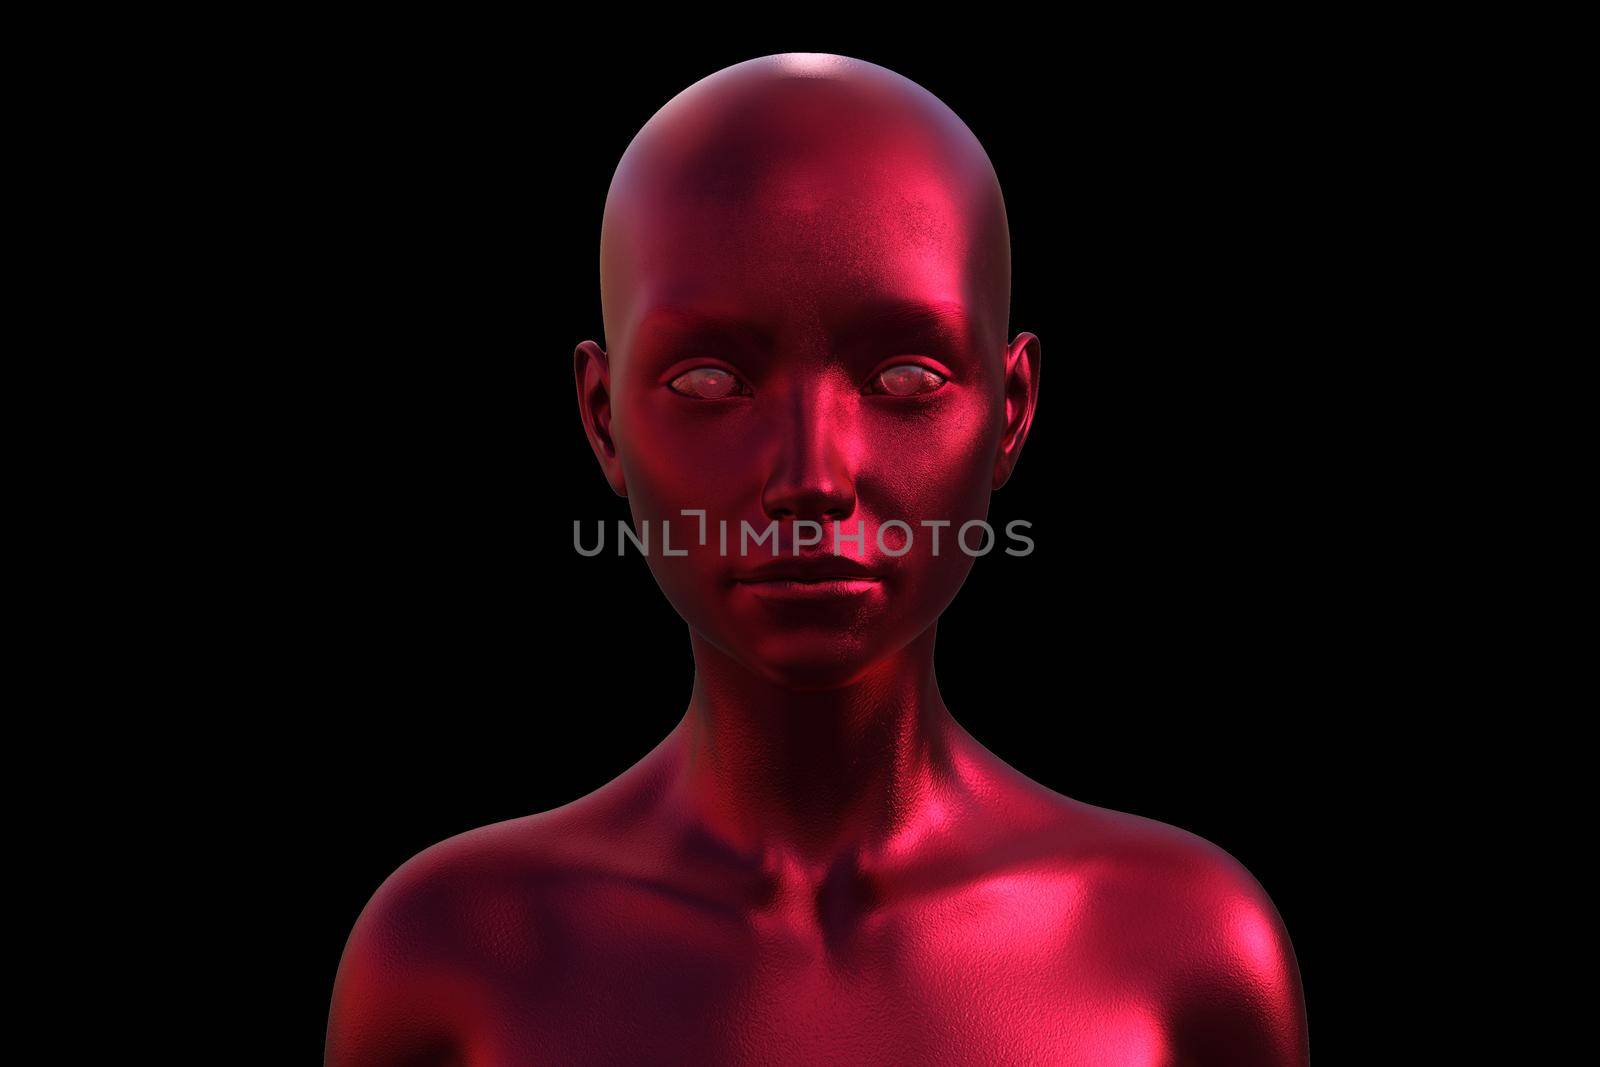 3d illustration of a bald woman. Image of a red female head on a dark background.